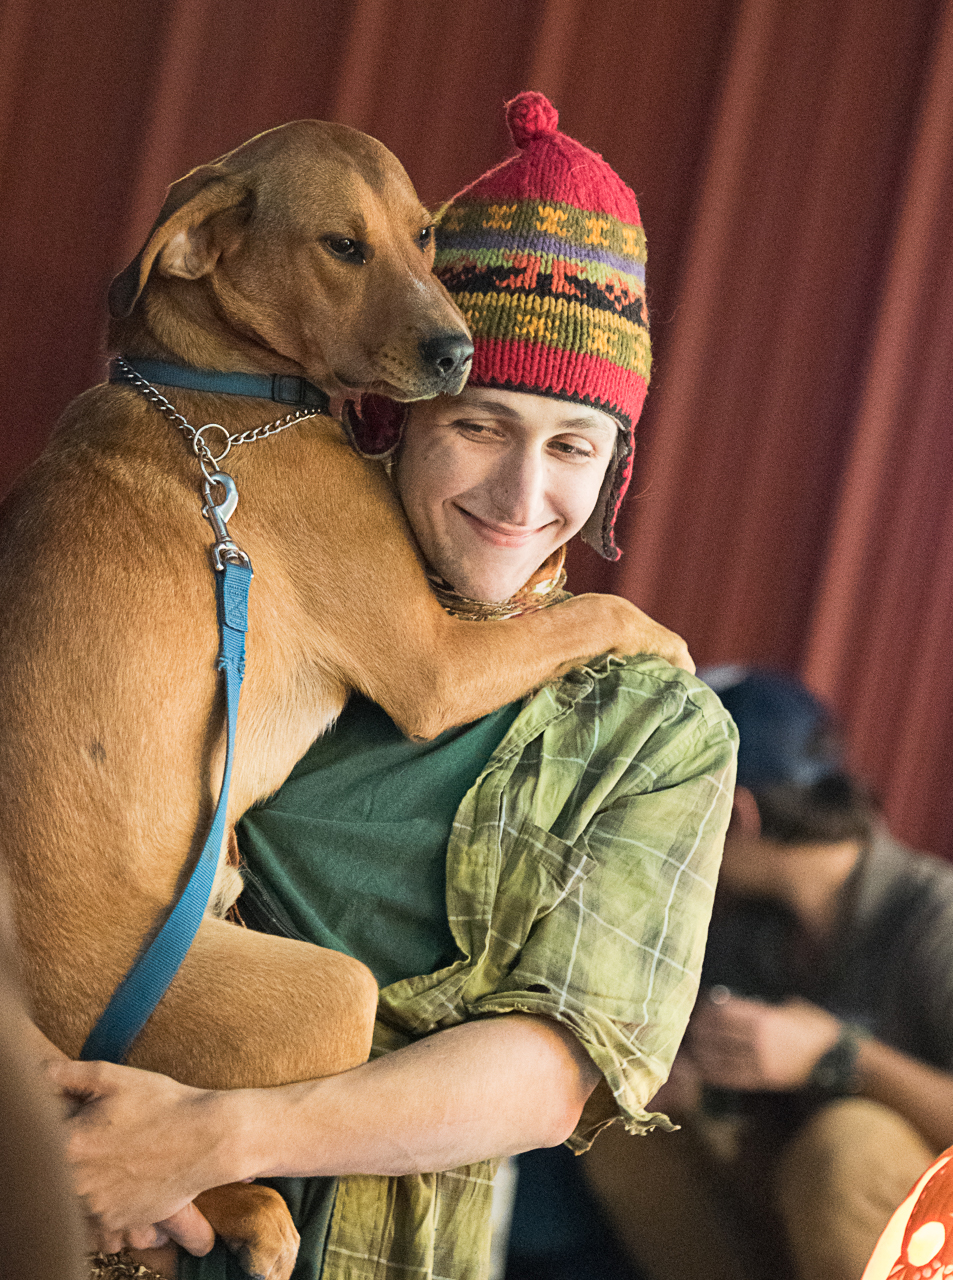 Nigel Wilson, a recent Ohio University math education graduate, dances with his shelter dog Rigbey to the music of Bright @ Night at Jackie O’s Brewery on October 25, 2015. (Robert McGraw/WOUB)